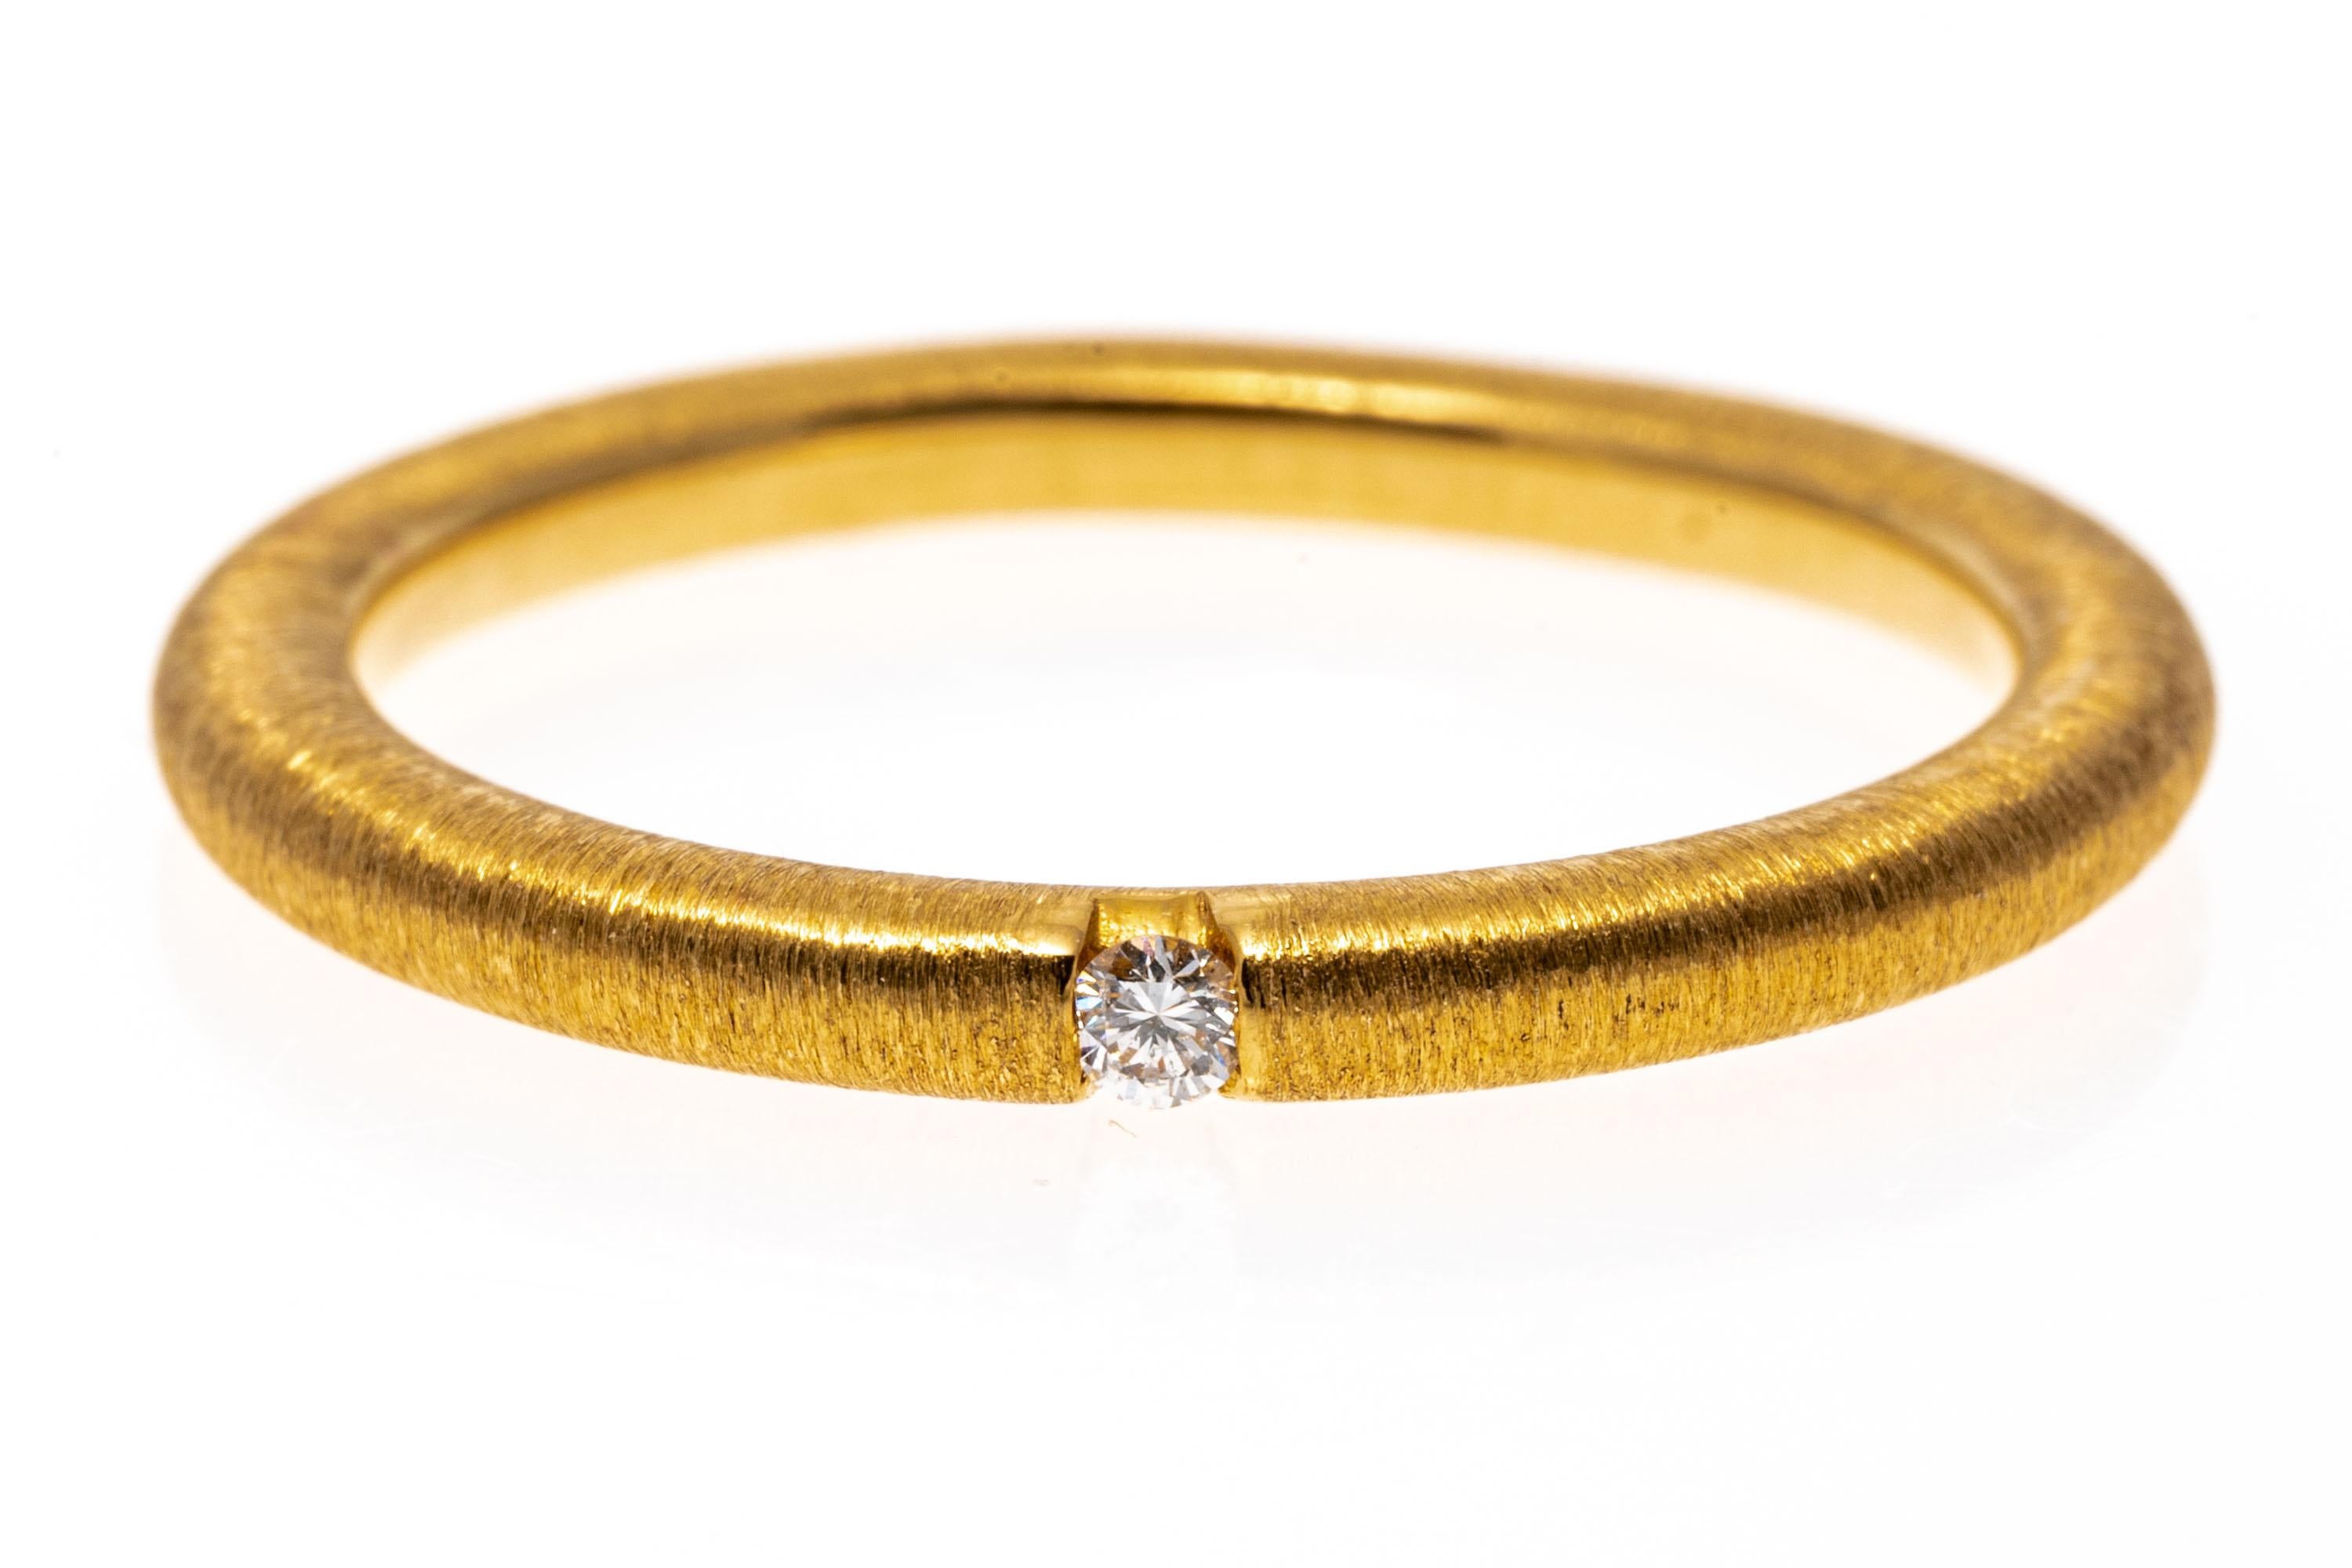 18k yellow gold ring. This beautiful, simple ring is a rounded, brushed finished band, flush set in the center with a small, round faceted accent diamond, approximately 0.02 CTS.
Marks: 18k
Dimensions: 1/16